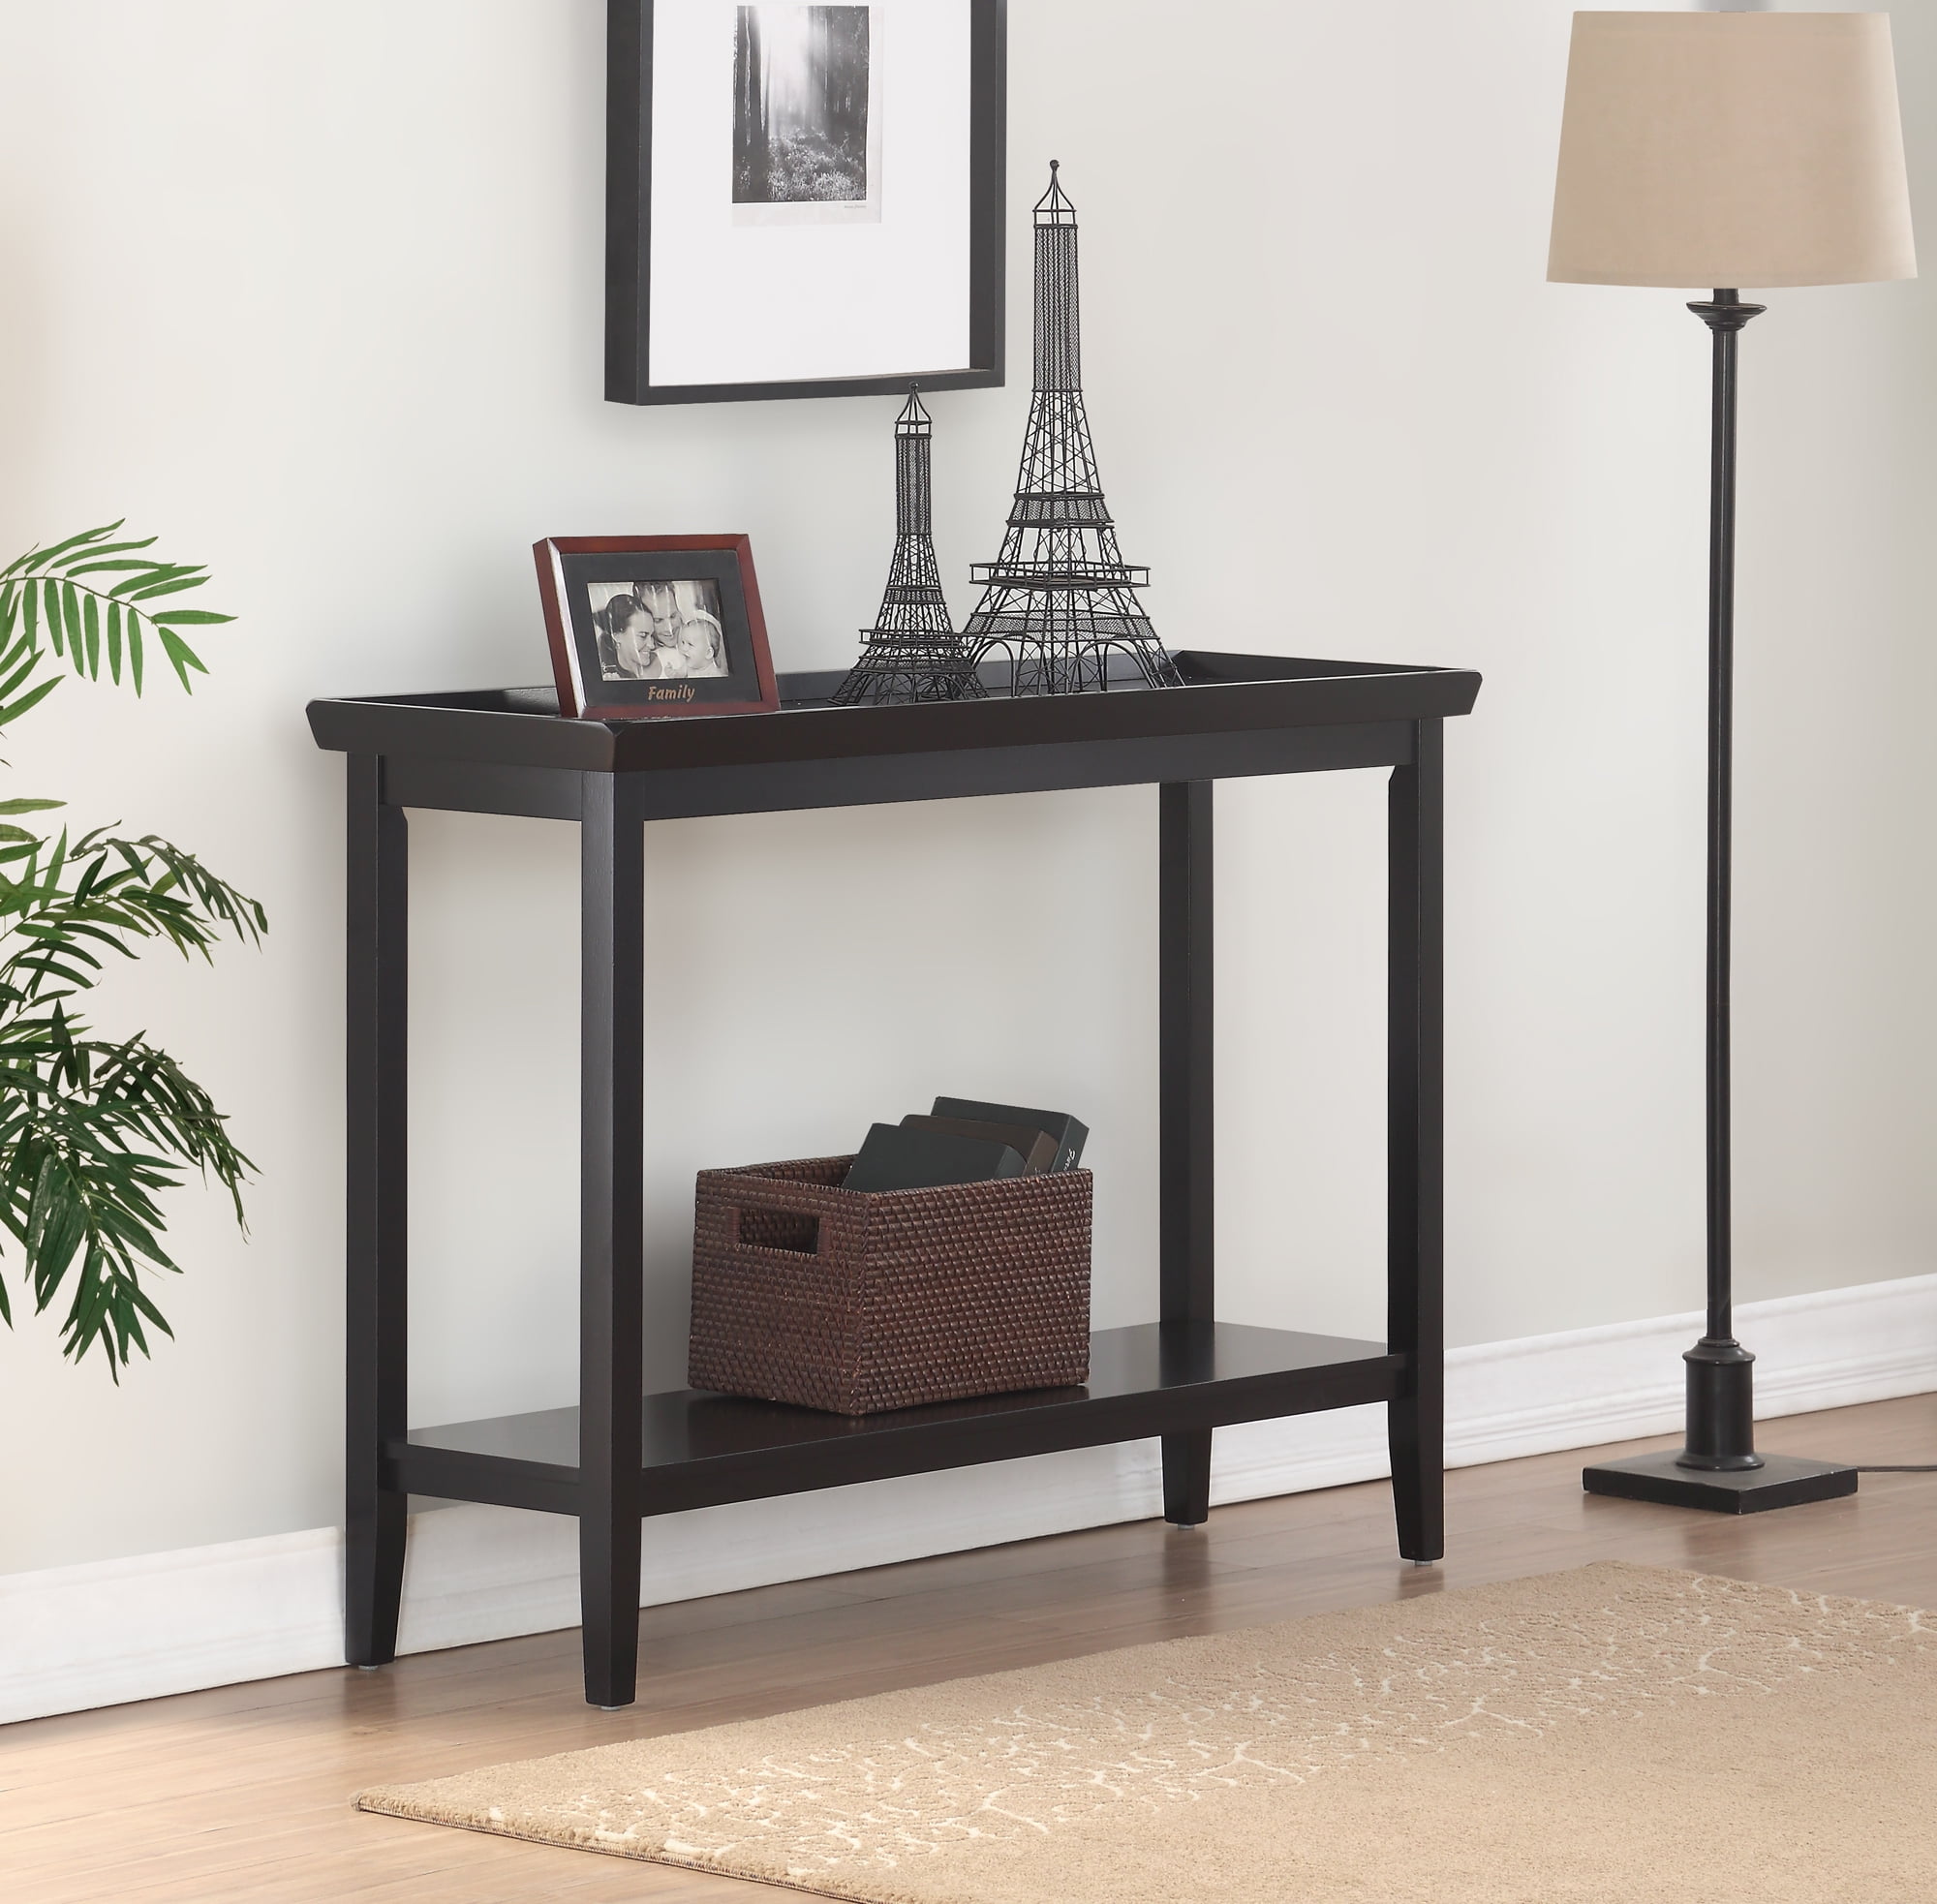 Convenience Concepts Ledgewood Console Table with Shelf, Black